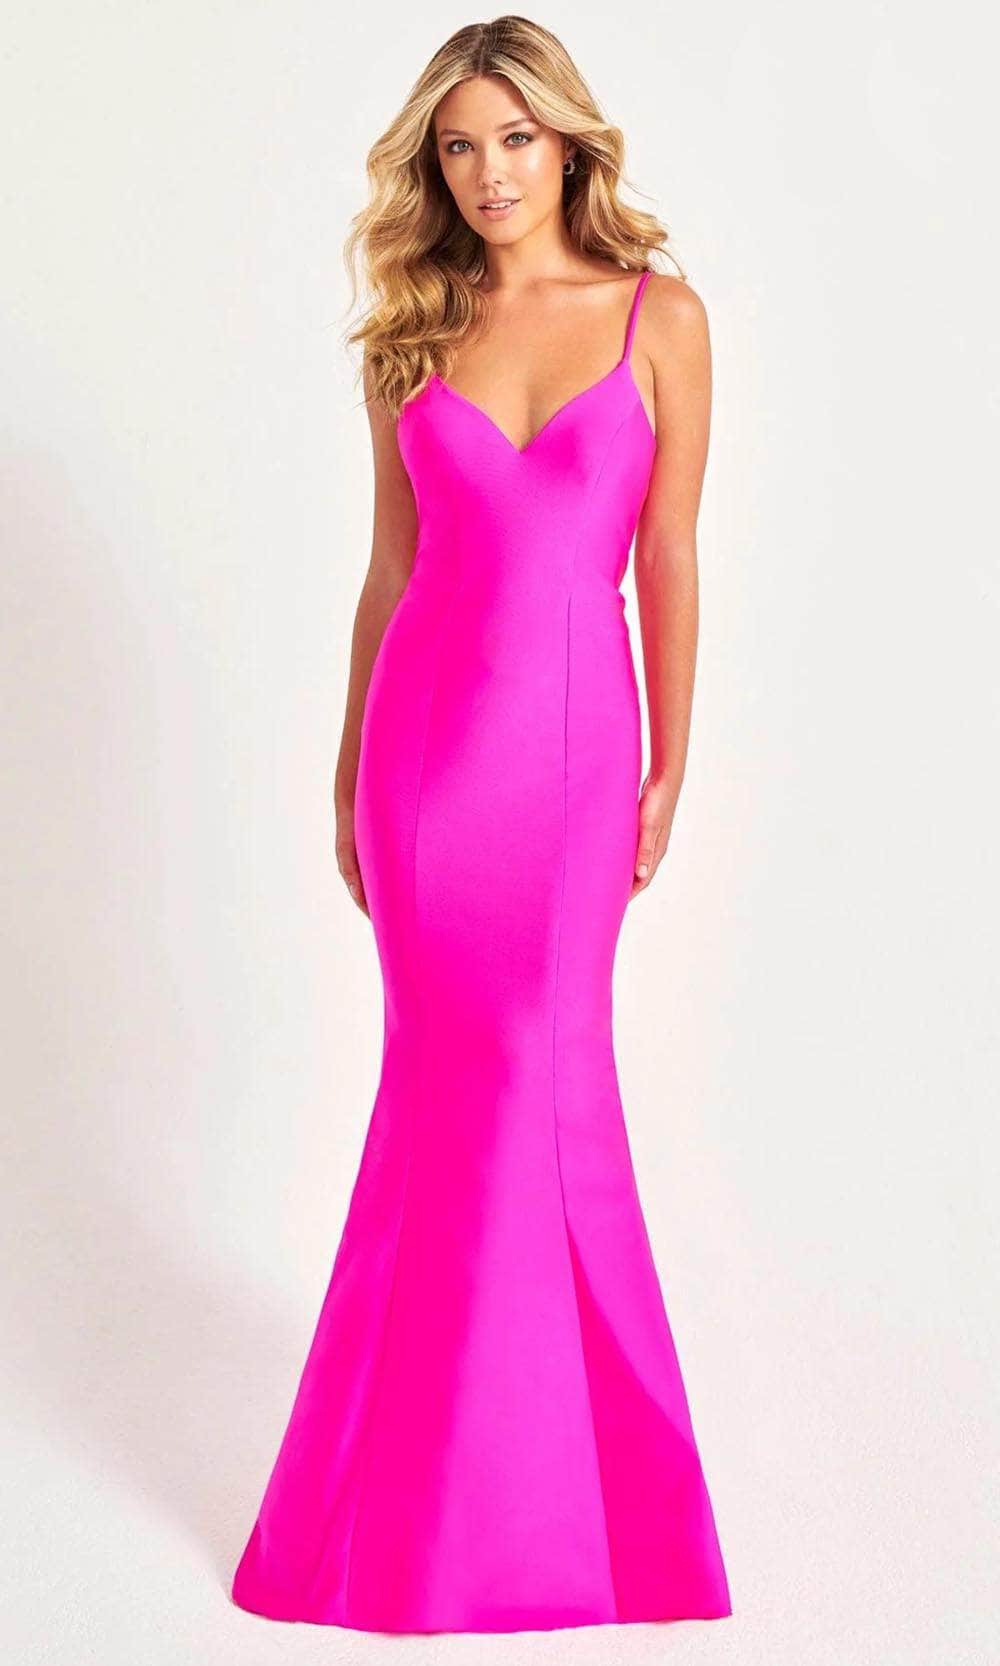 Image of Faviana 11047 - Satin Mermaid Prom Gown